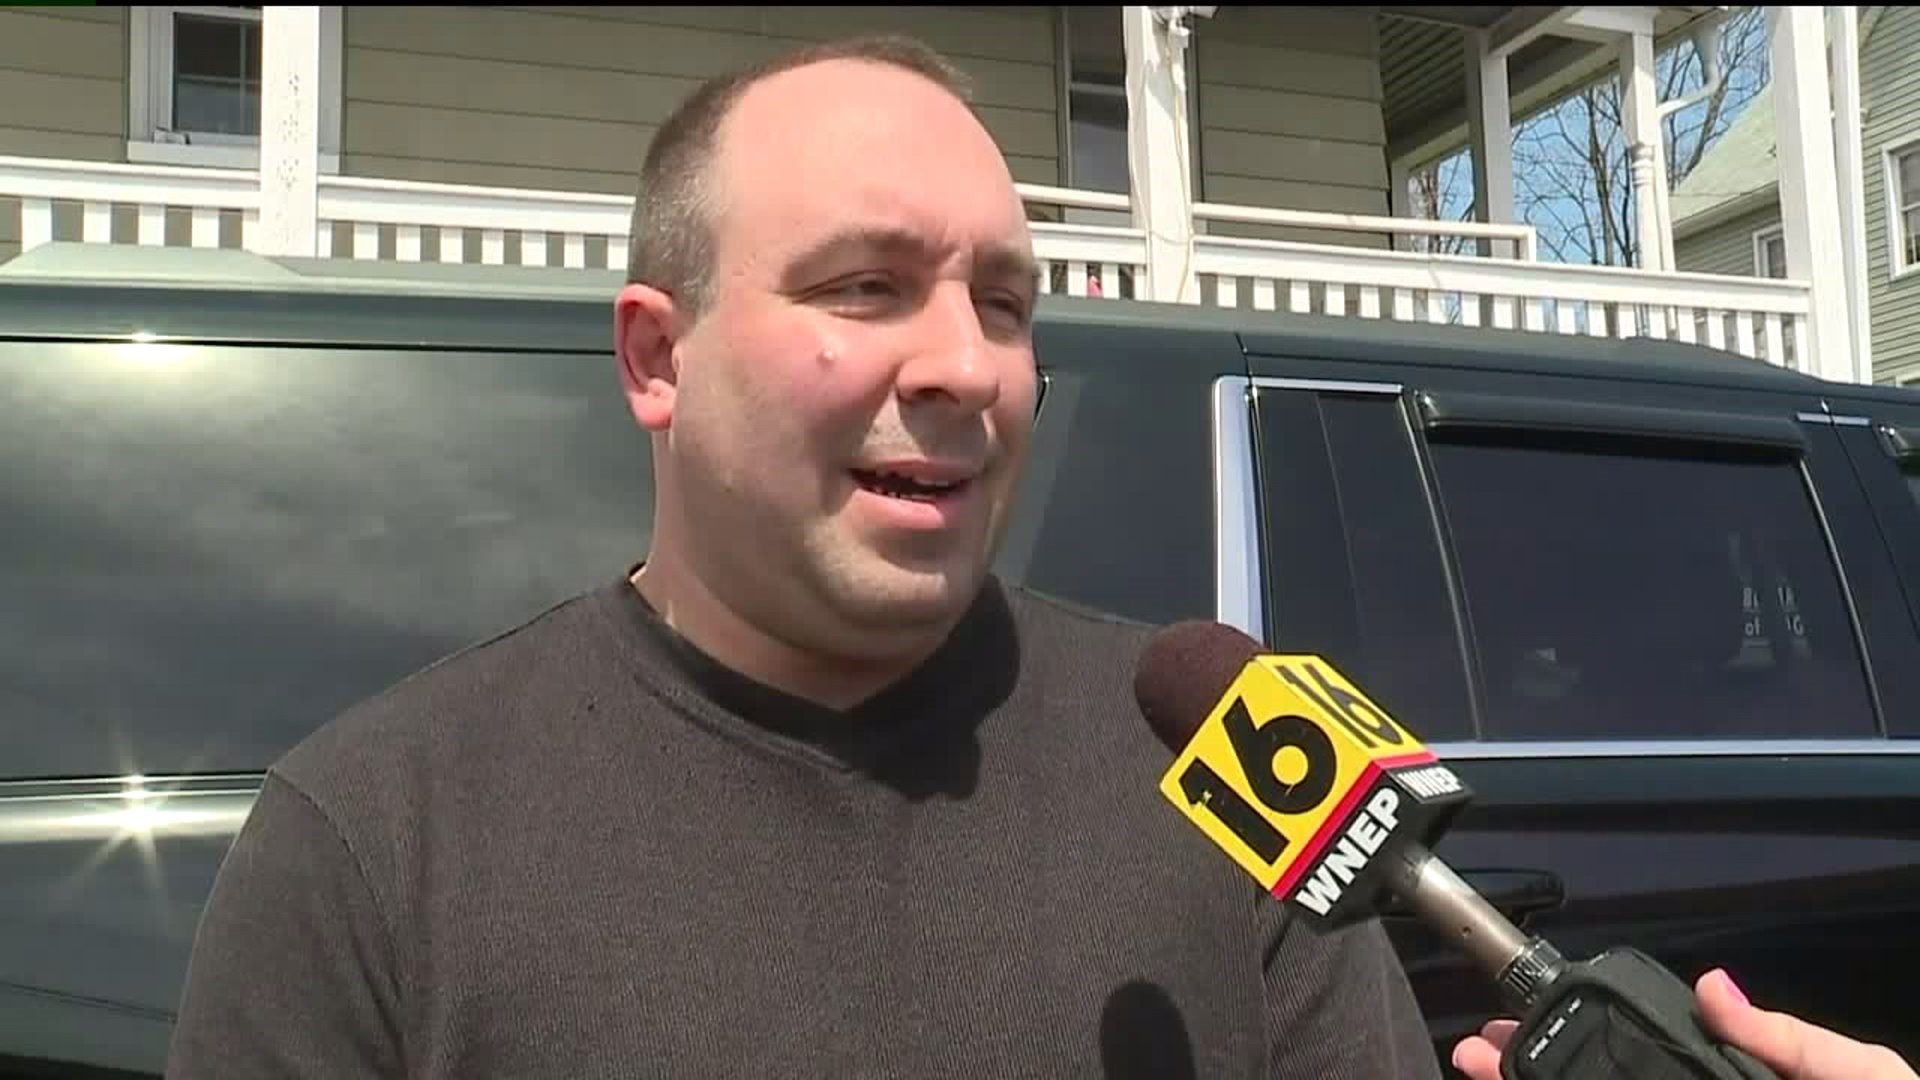 Bloomsburg Mayor Fights Call to Resign